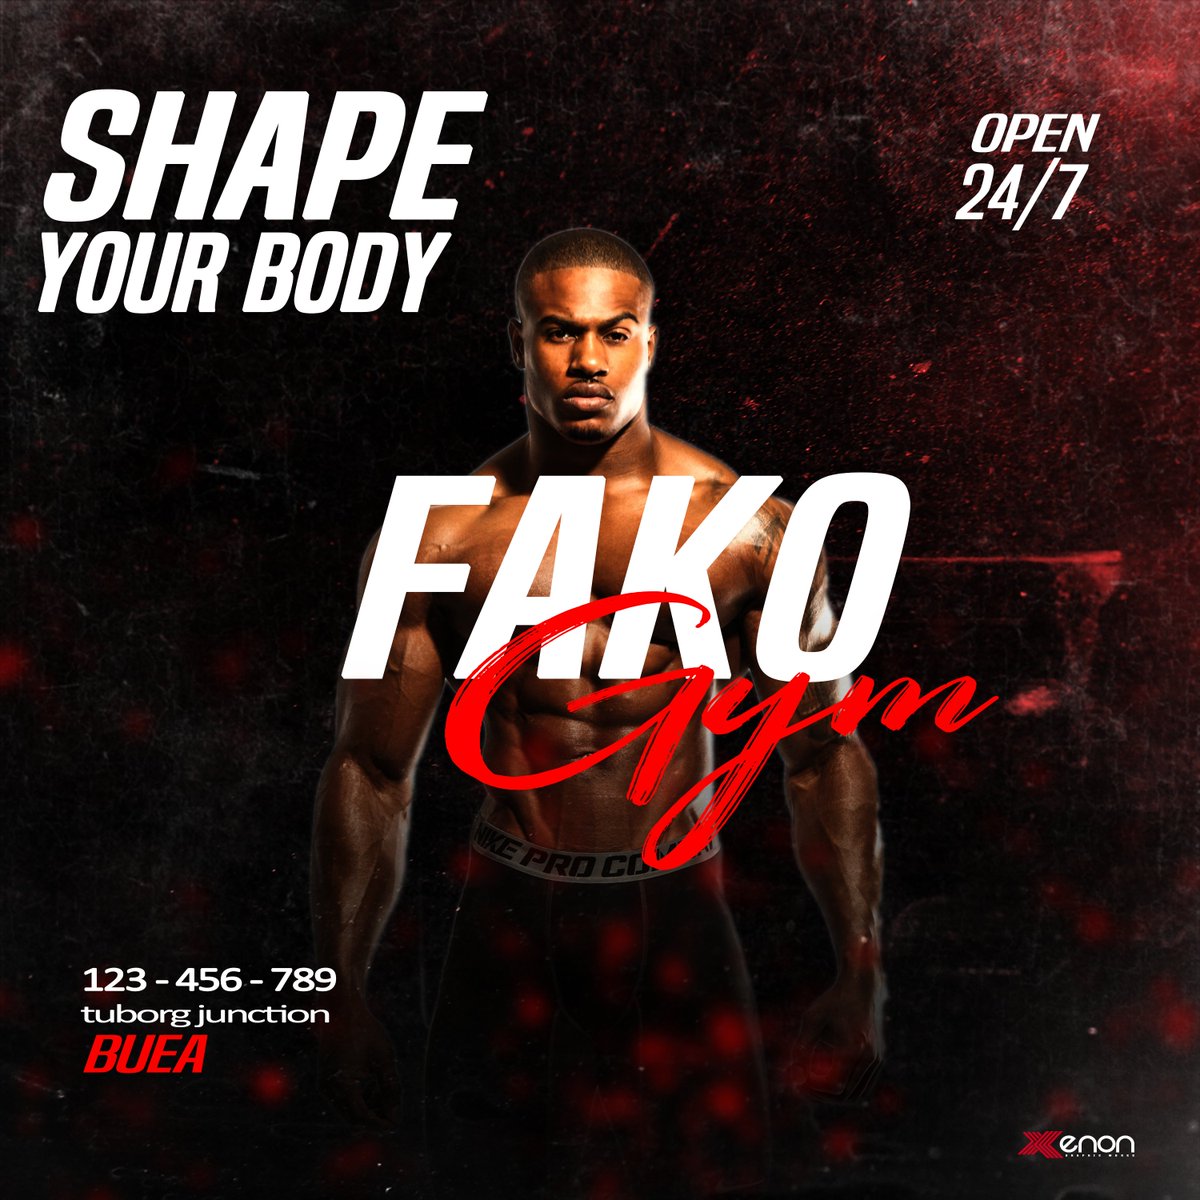 Exercise is not only key to physical health but to peace of mind!
Like what you see? Brand with us today🤩
#fitnessdesign #xenonmediacm #newmonth #positivity #creativity #october #fakogym #Buea